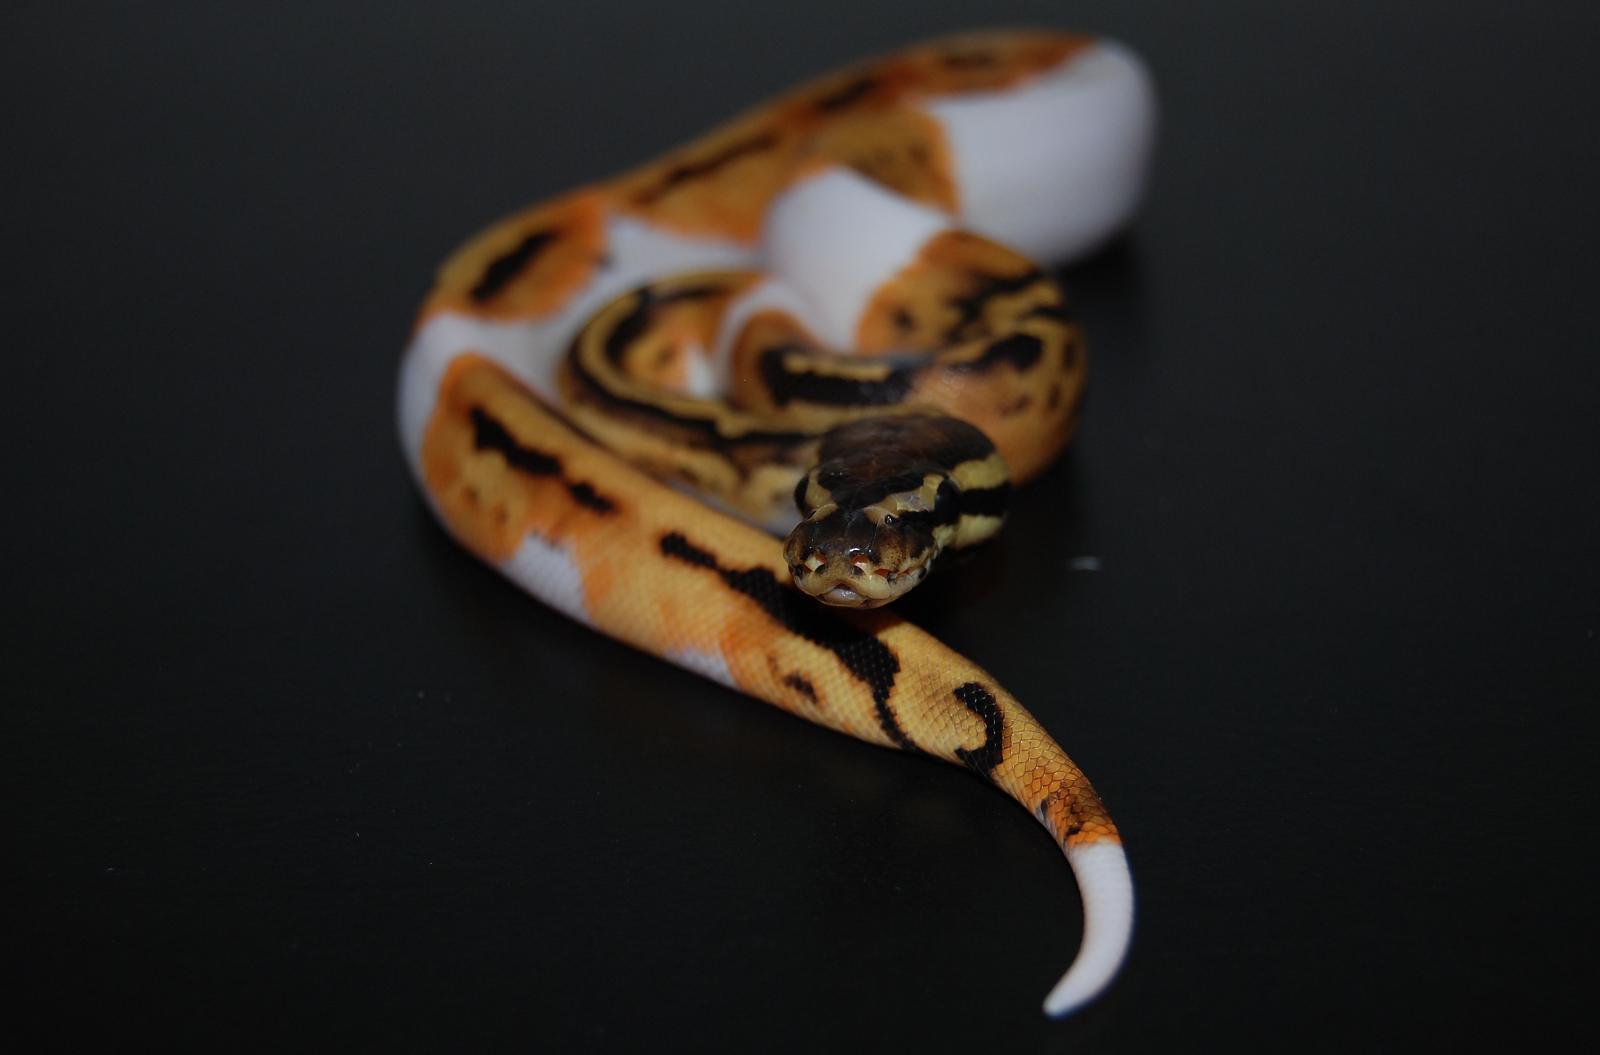 Does anyone have photos of piebald mutation in game